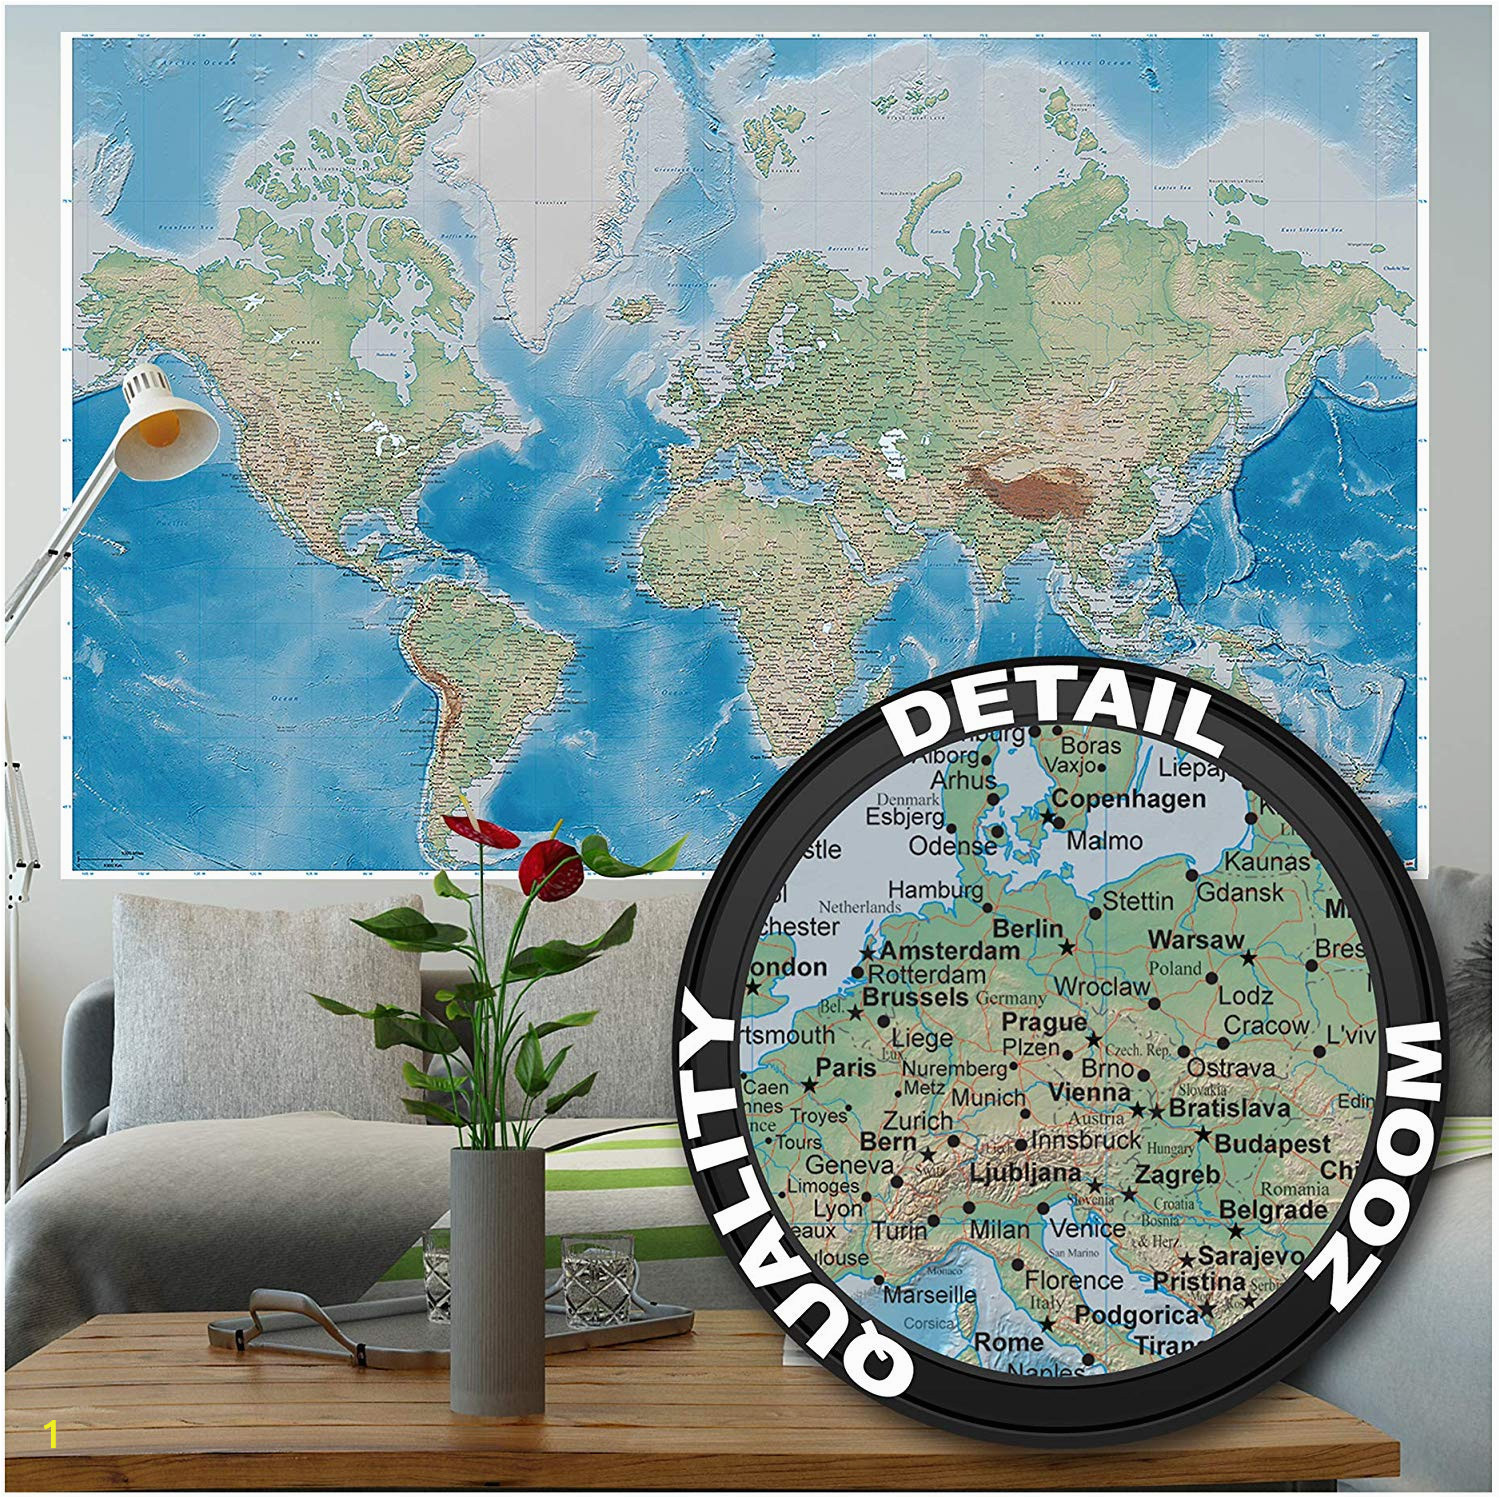 Ready Made Wall Murals Mural – World Map – Wall Picture Decoration Miller Projection In Plastically Relief Design Earth atlas Globe Wallposter Poster Decor 82 7 X 55